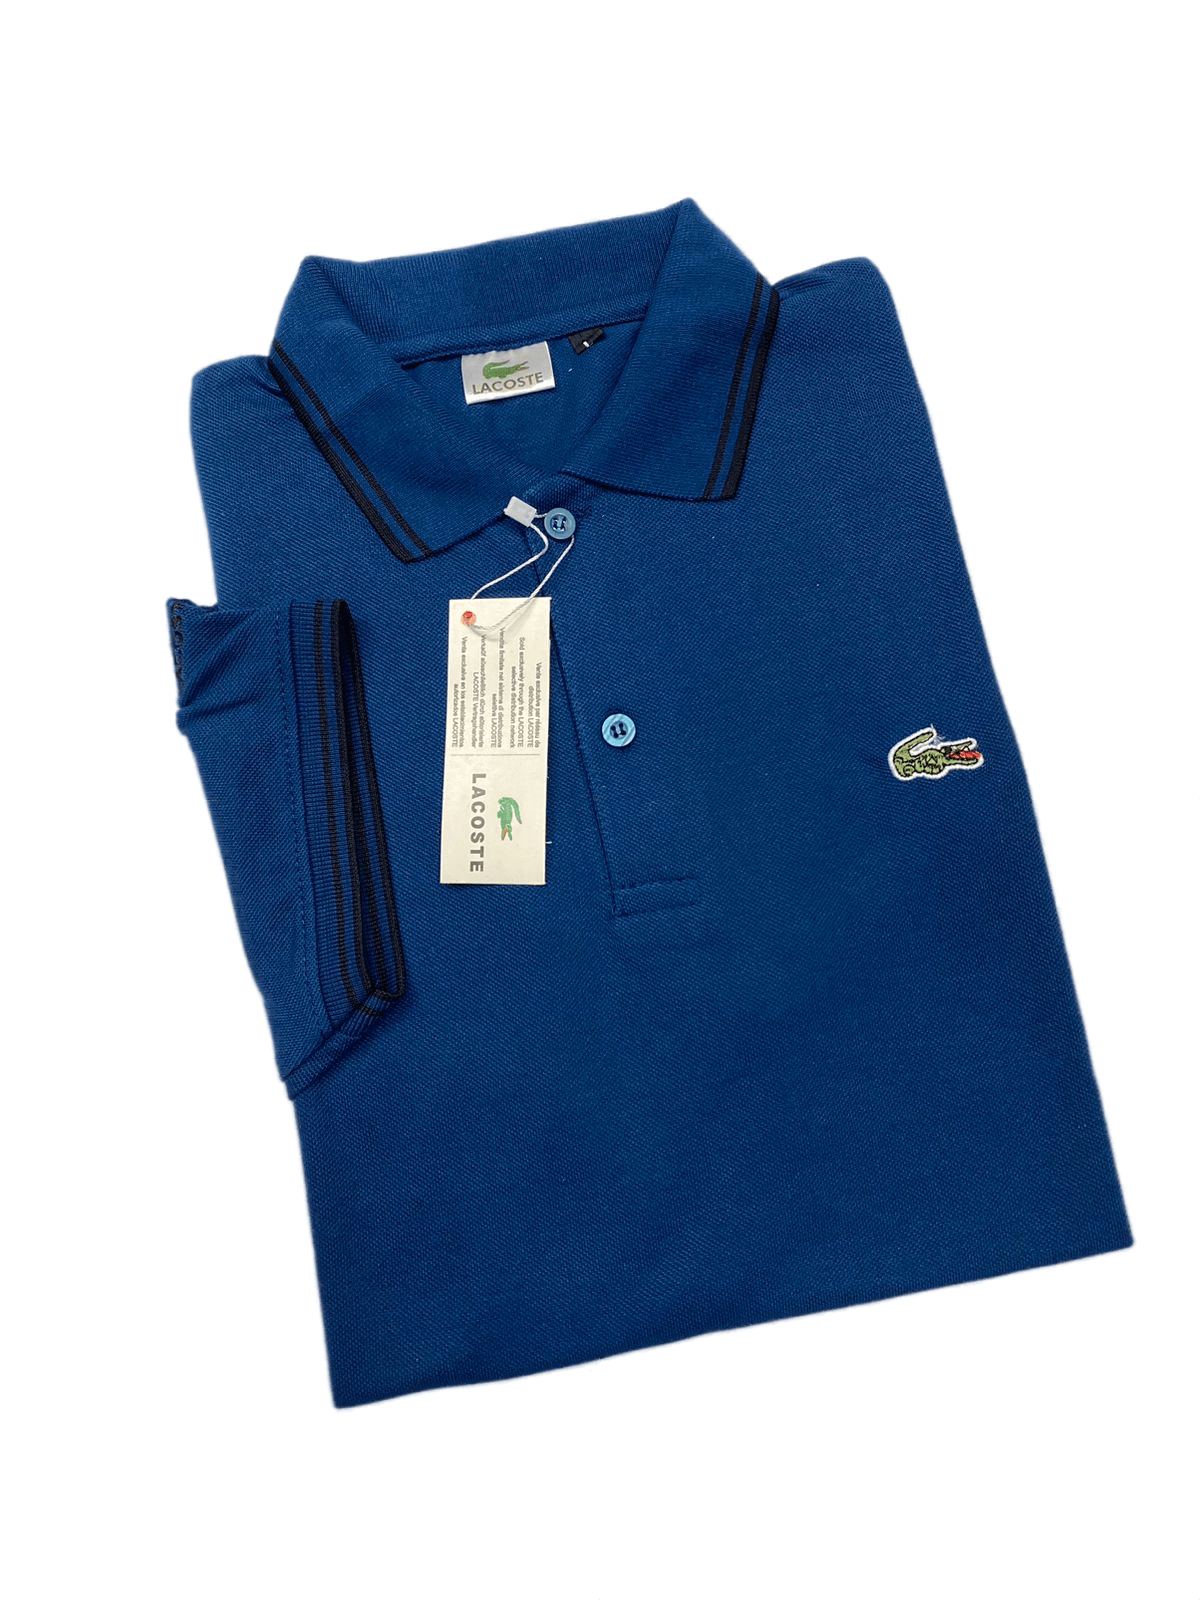 LACOSTE | 100 % IMPORTED | MEN'S POLO T SHIRT | TIPPING COLLER ...